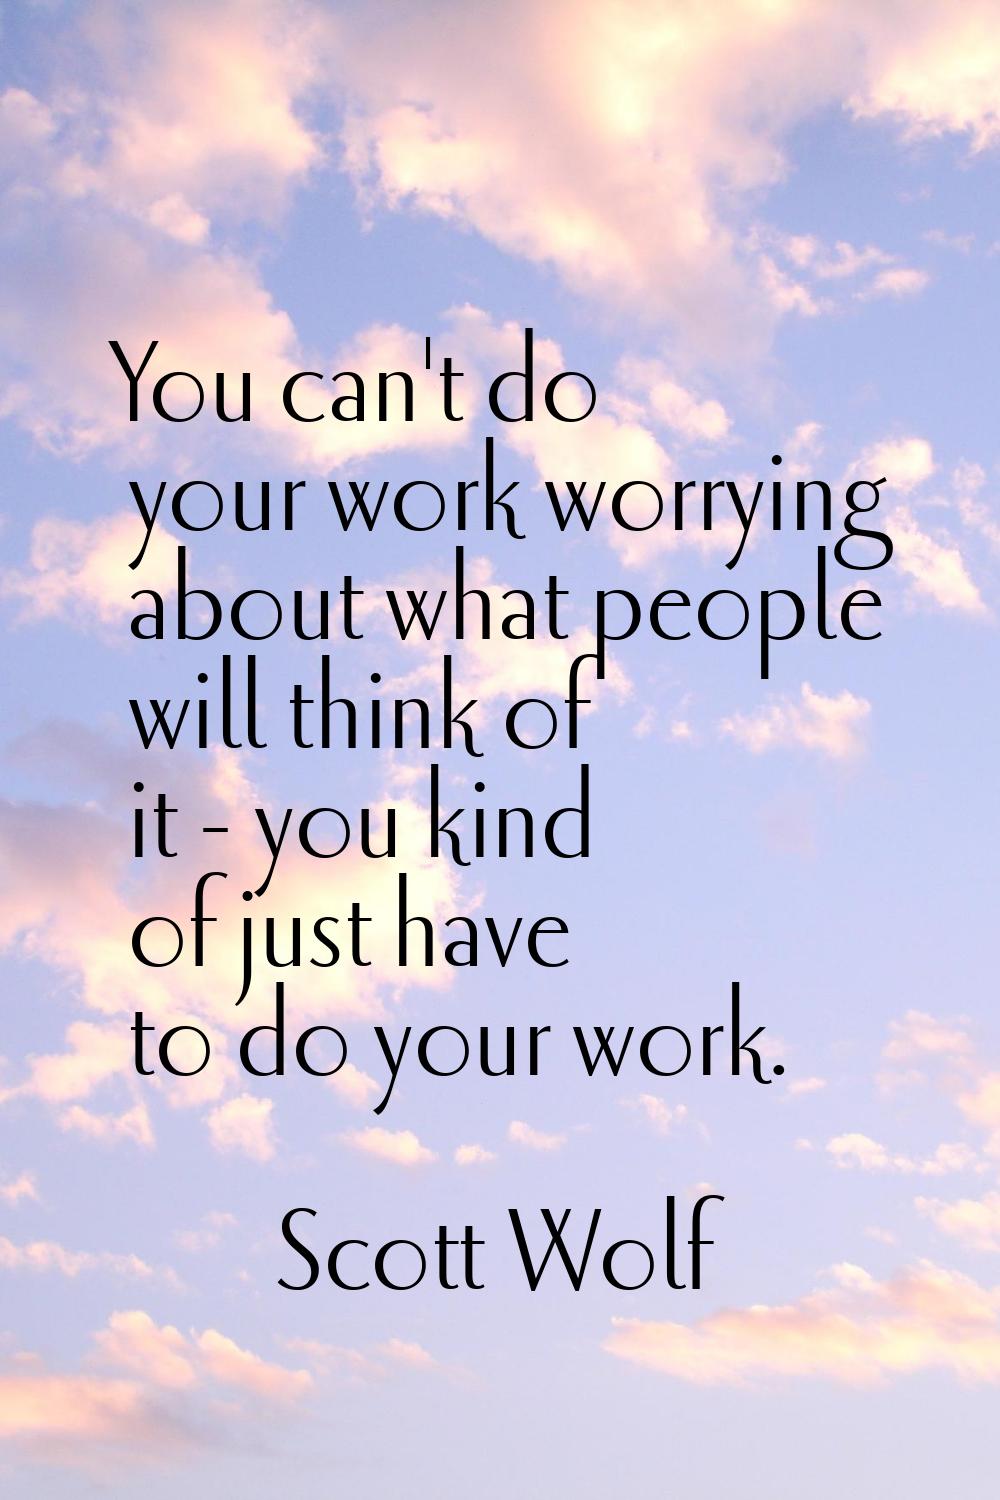 You can't do your work worrying about what people will think of it - you kind of just have to do yo